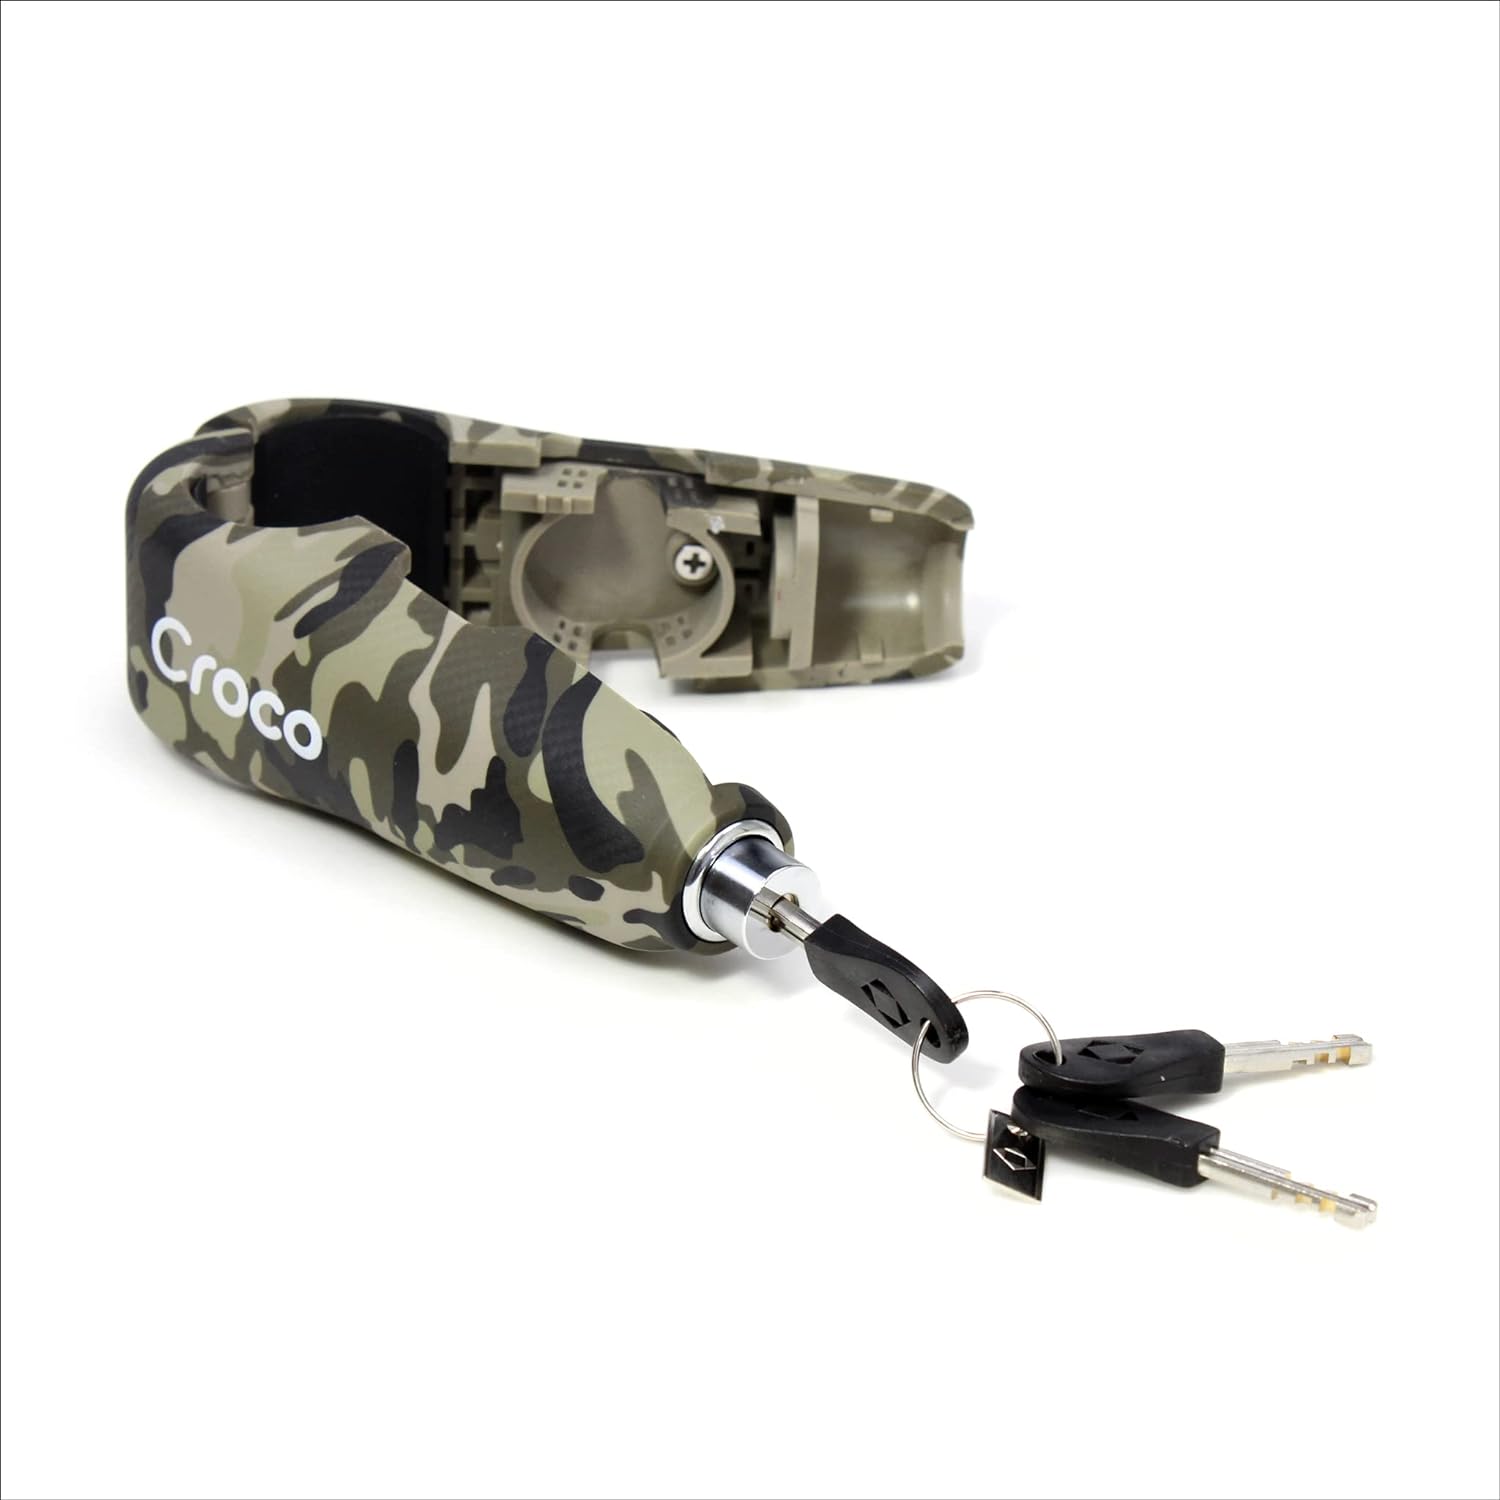 The image presents a Camo green Croco bike lock with an inserted key, partially revealing its internal mechanism. The lock is textured to resemble carbon fiber, and the Croco branding is prominently displayed. It seems to be a bar lock, commonly used for bicycles, which implies a lightweight yet secure design. The photo emphasizes the lock's use-case scenario and gives a good impression of how it operates with the key in place